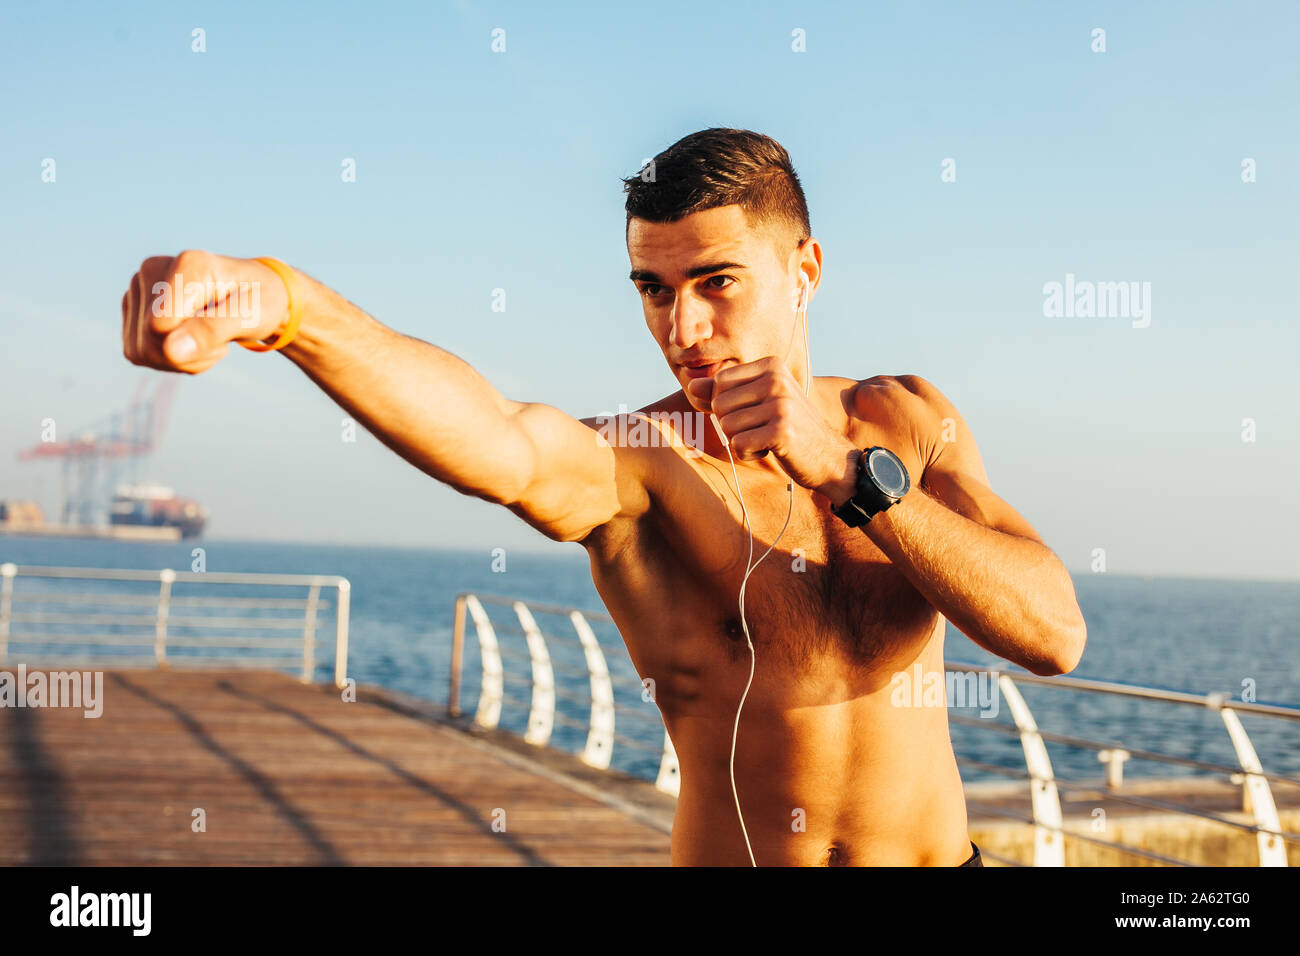 Sporty guy boxing on training by the sea Stock Photo